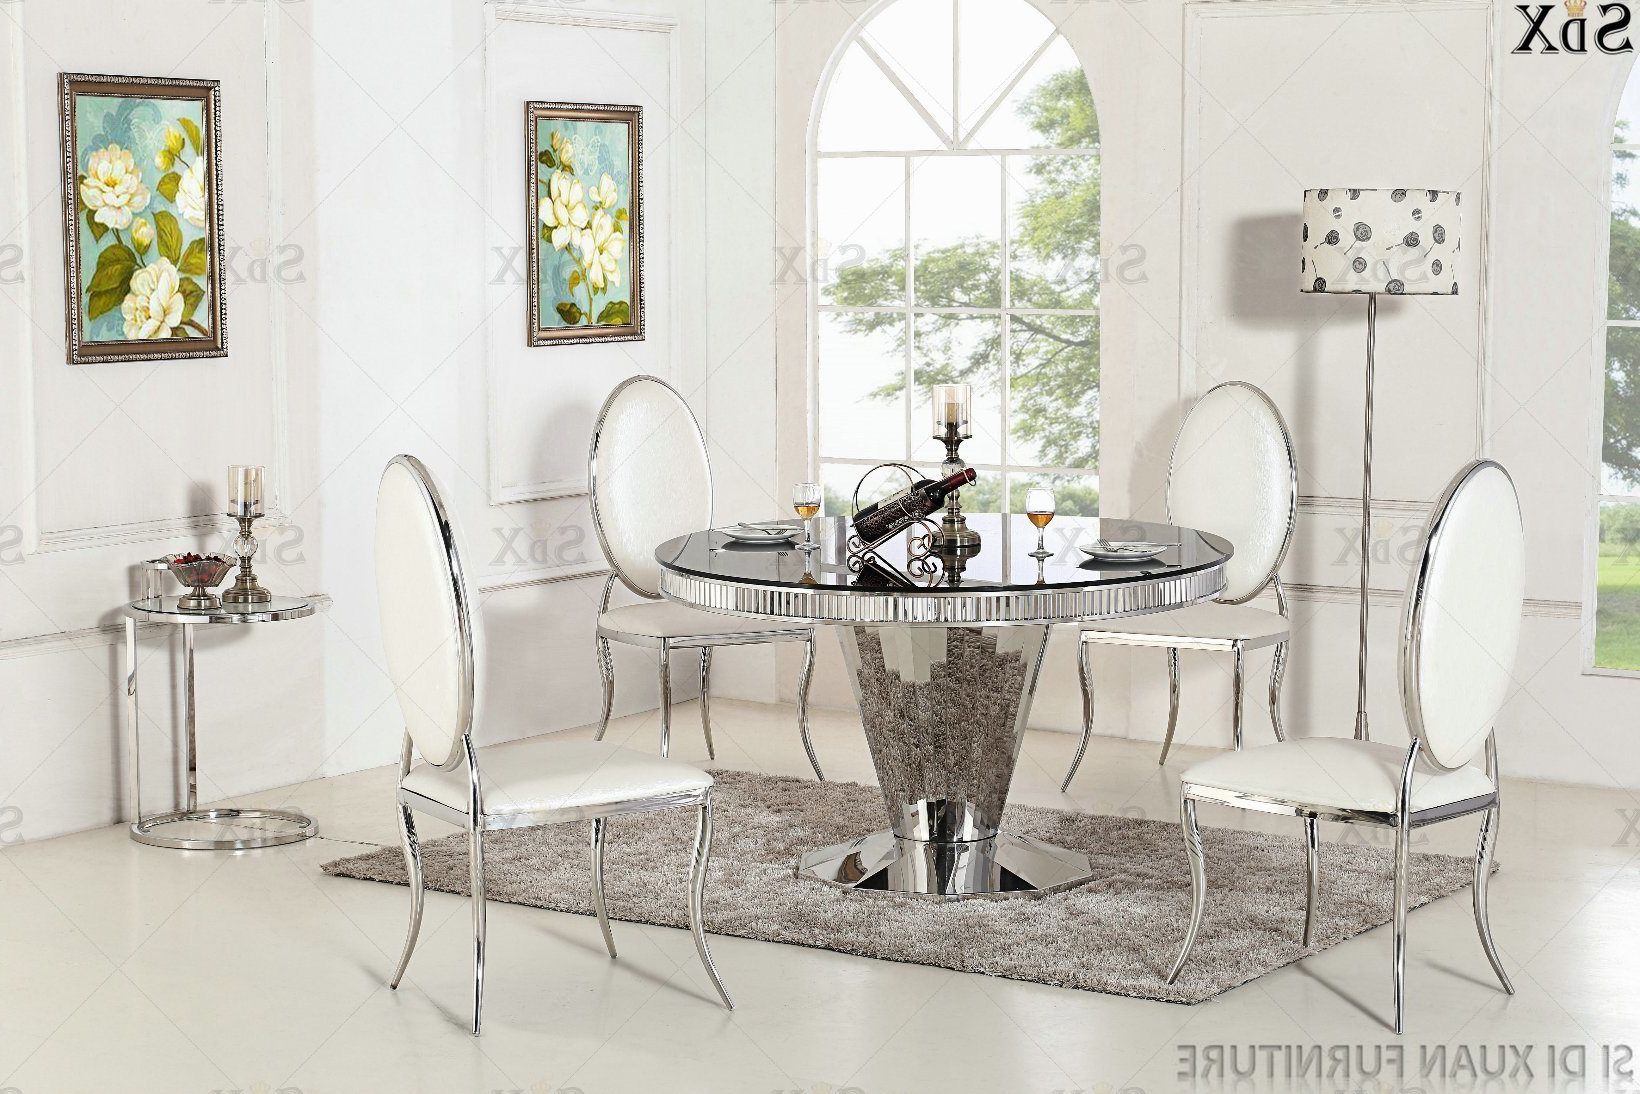 [%[hot Item] Modern Round Home Stainless Steel Glass Top Furniture Dining  Room Table Regarding Popular Modern Round Glass Top Dining Tables|modern Round Glass Top Dining Tables Inside Well Known [hot Item] Modern Round Home Stainless Steel Glass Top Furniture Dining  Room Table|best And Newest Modern Round Glass Top Dining Tables Inside [hot Item] Modern Round Home Stainless Steel Glass Top Furniture Dining  Room Table|well Known [hot Item] Modern Round Home Stainless Steel Glass Top Furniture Dining  Room Table Within Modern Round Glass Top Dining Tables%] (View 25 of 30)